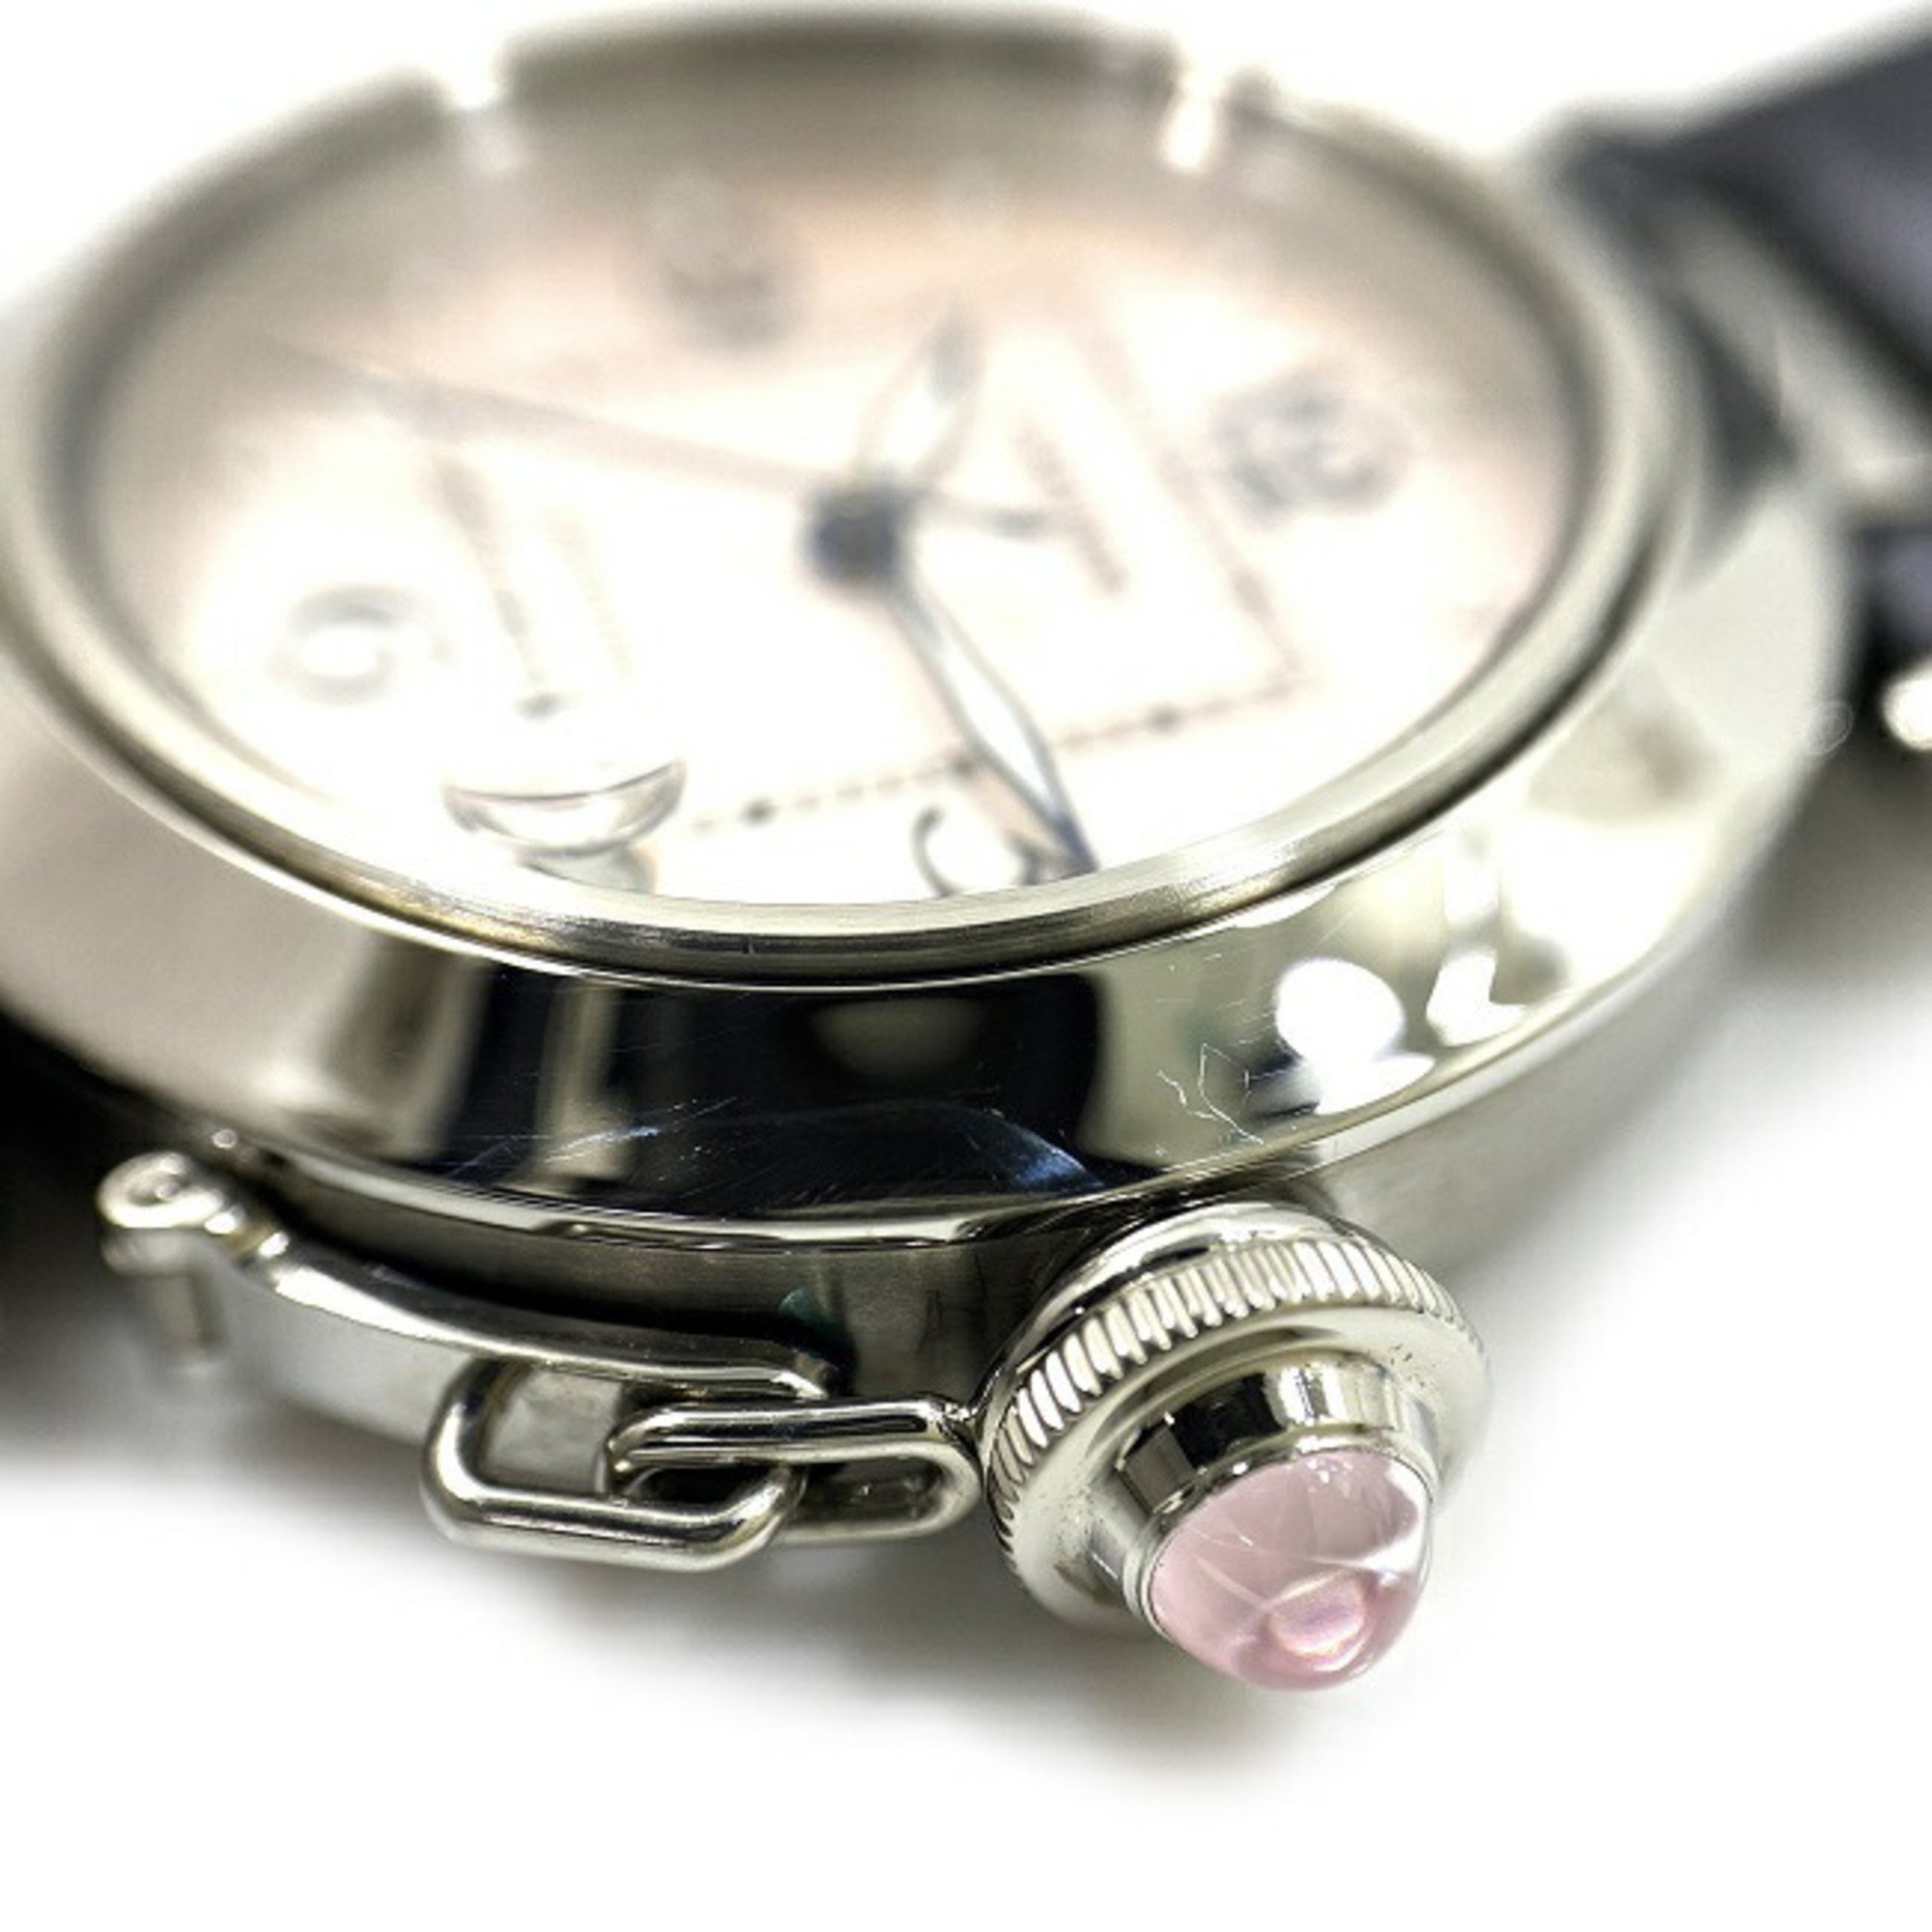 Cartier watch Pasha gray silver pink shell 2324 ladies leather SS automatic overhauled 35mm winding round crown cap